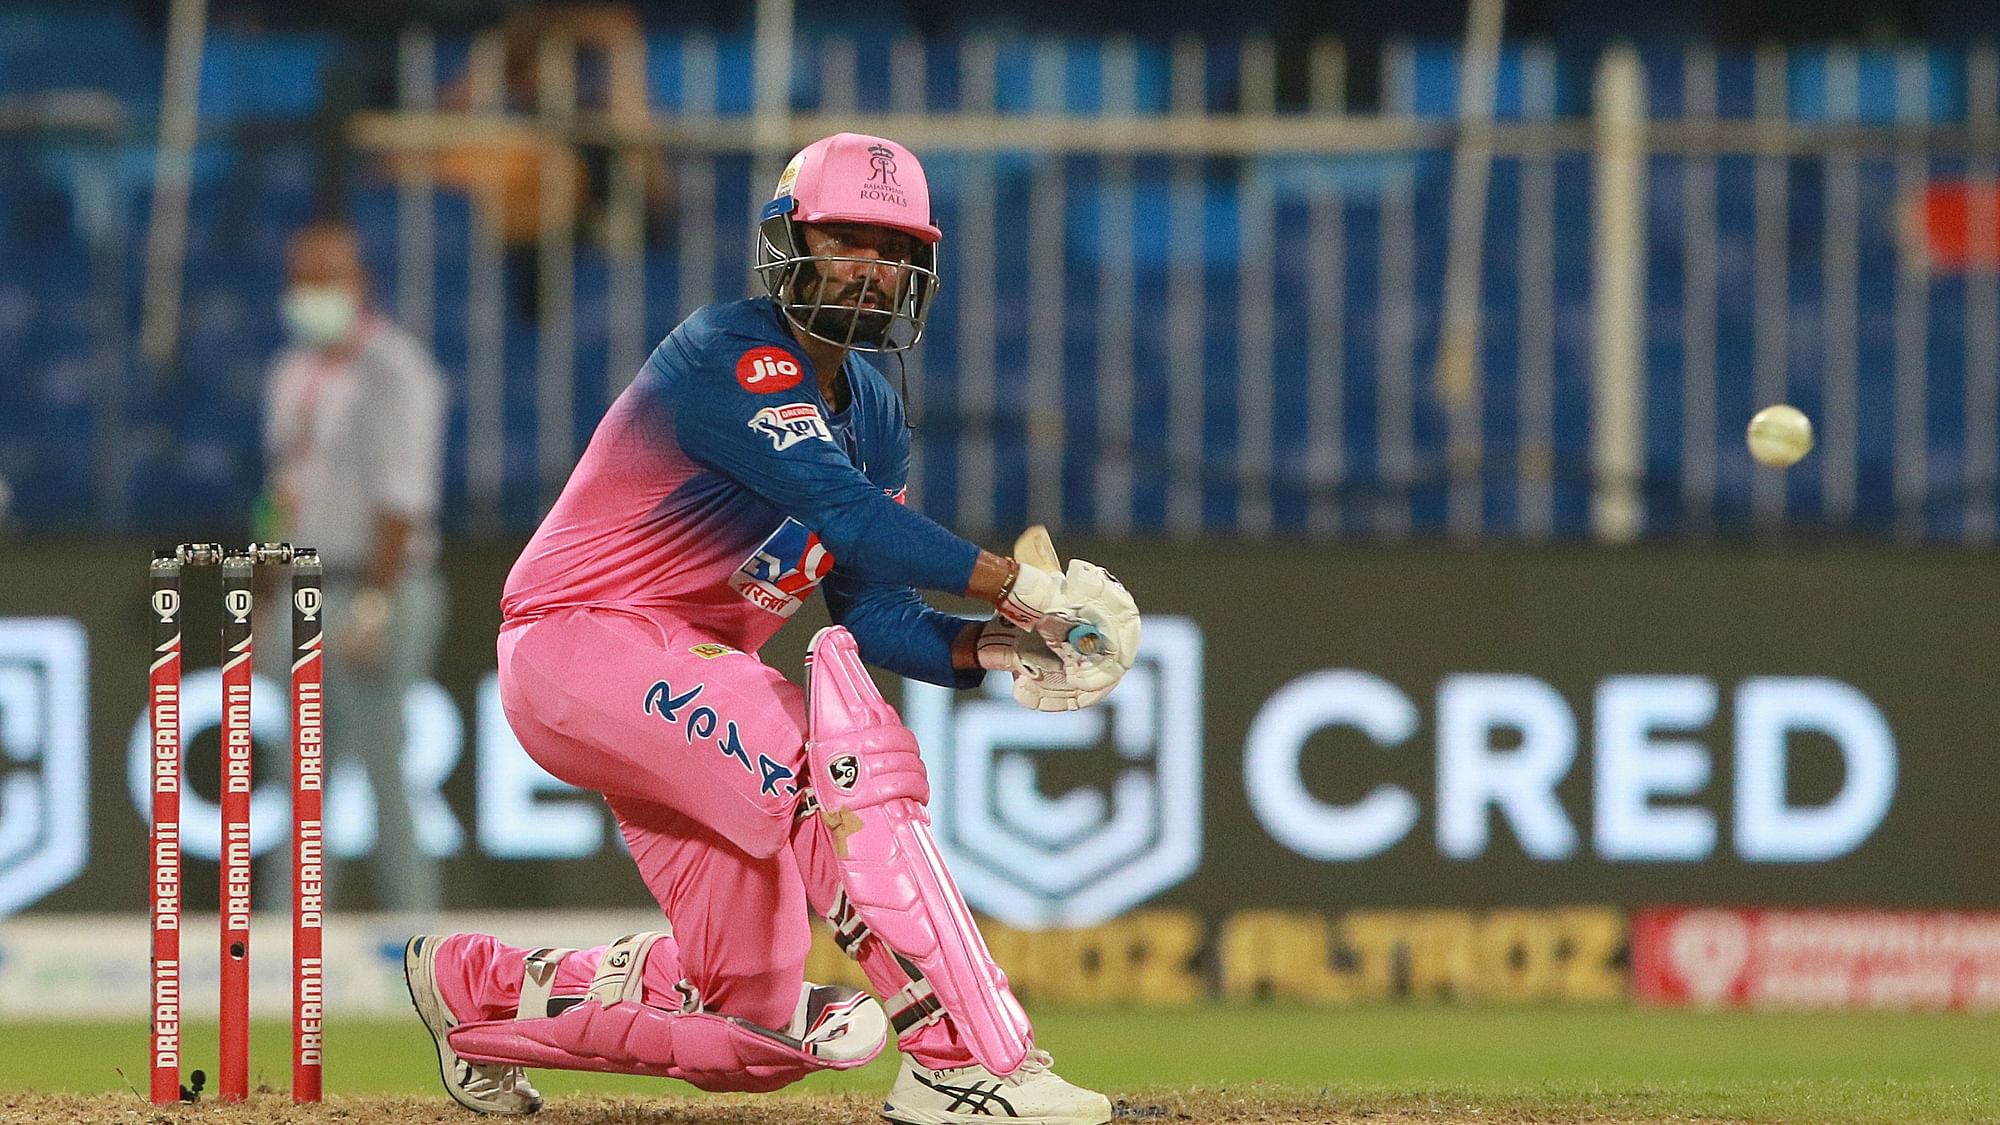 Rajasthan Royals’ Rahul Tewatia played one of the comeback innings of the IPL by scoring 45 runs in his last 12 balls after 8 (19).